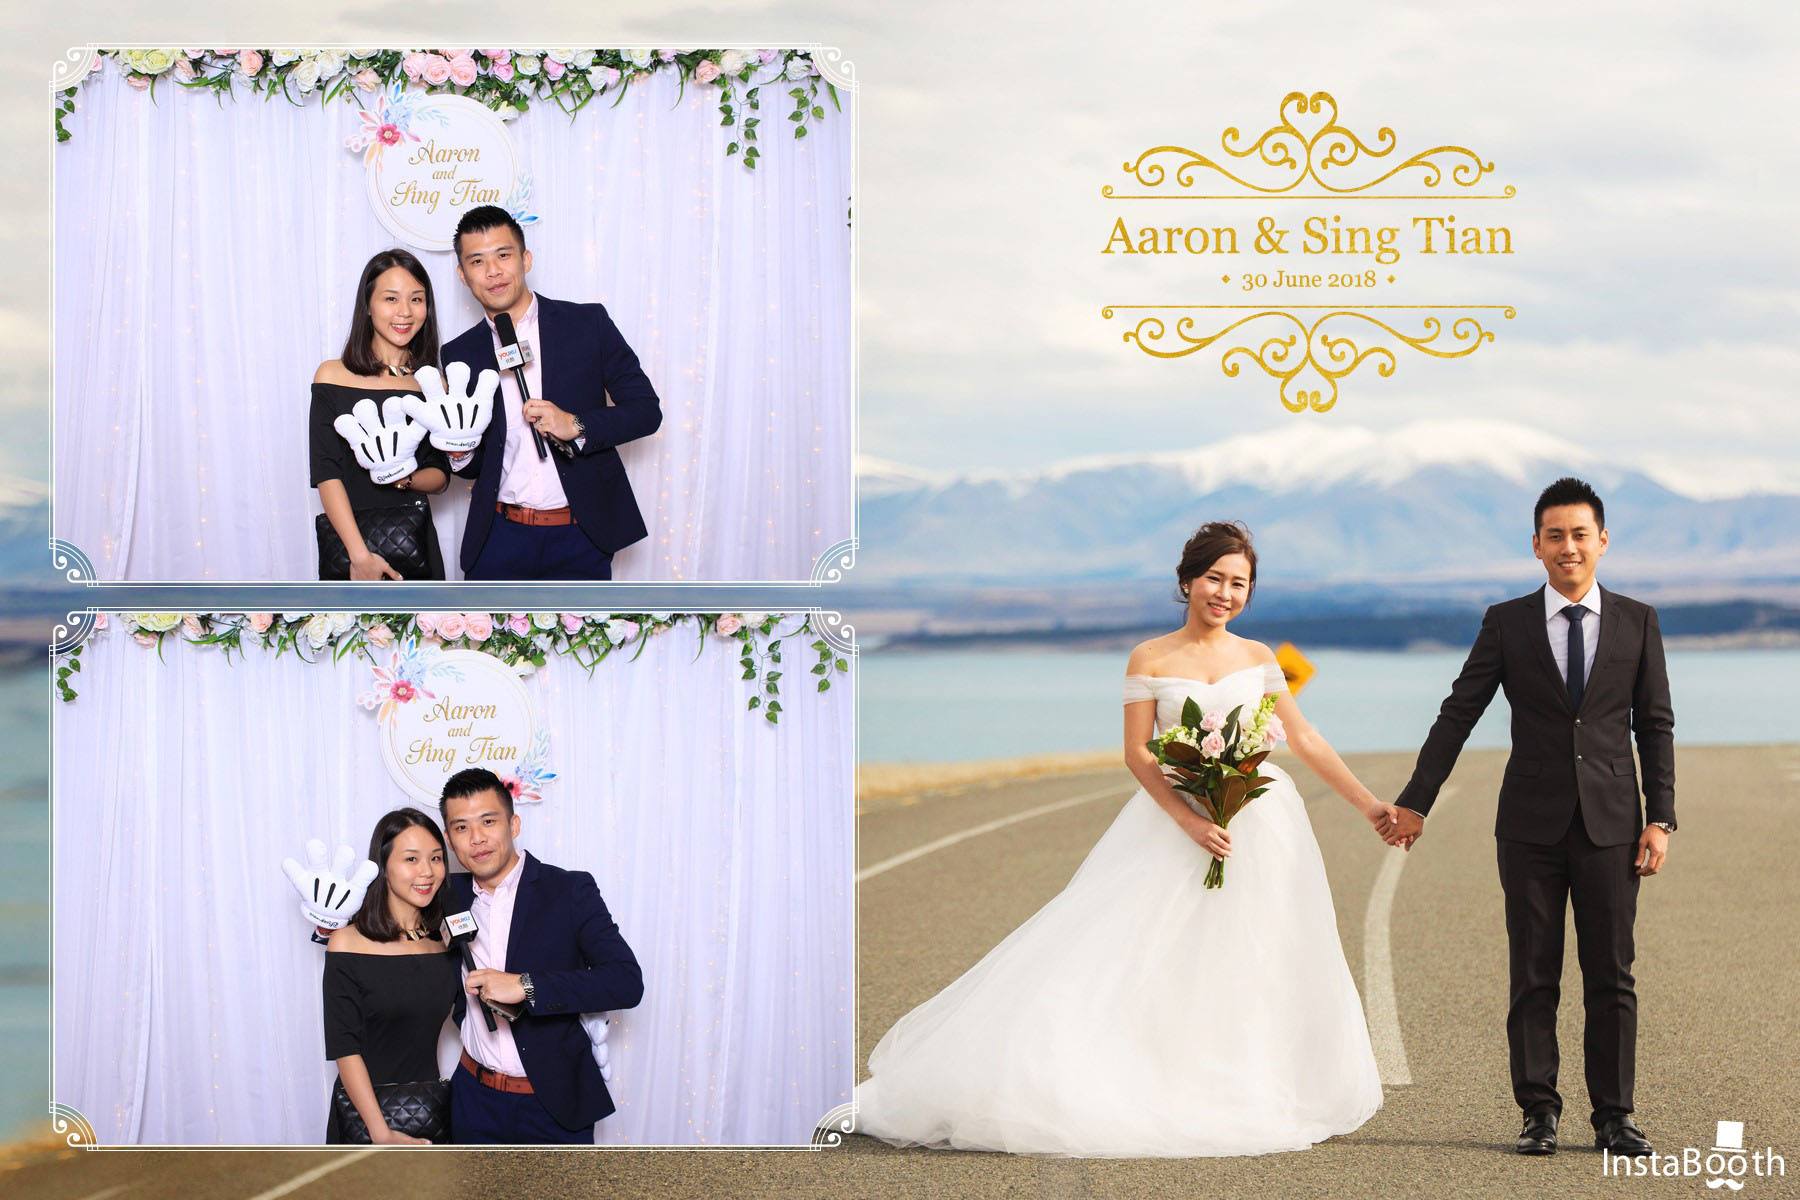 photobooth - Aaron and Sing Tian